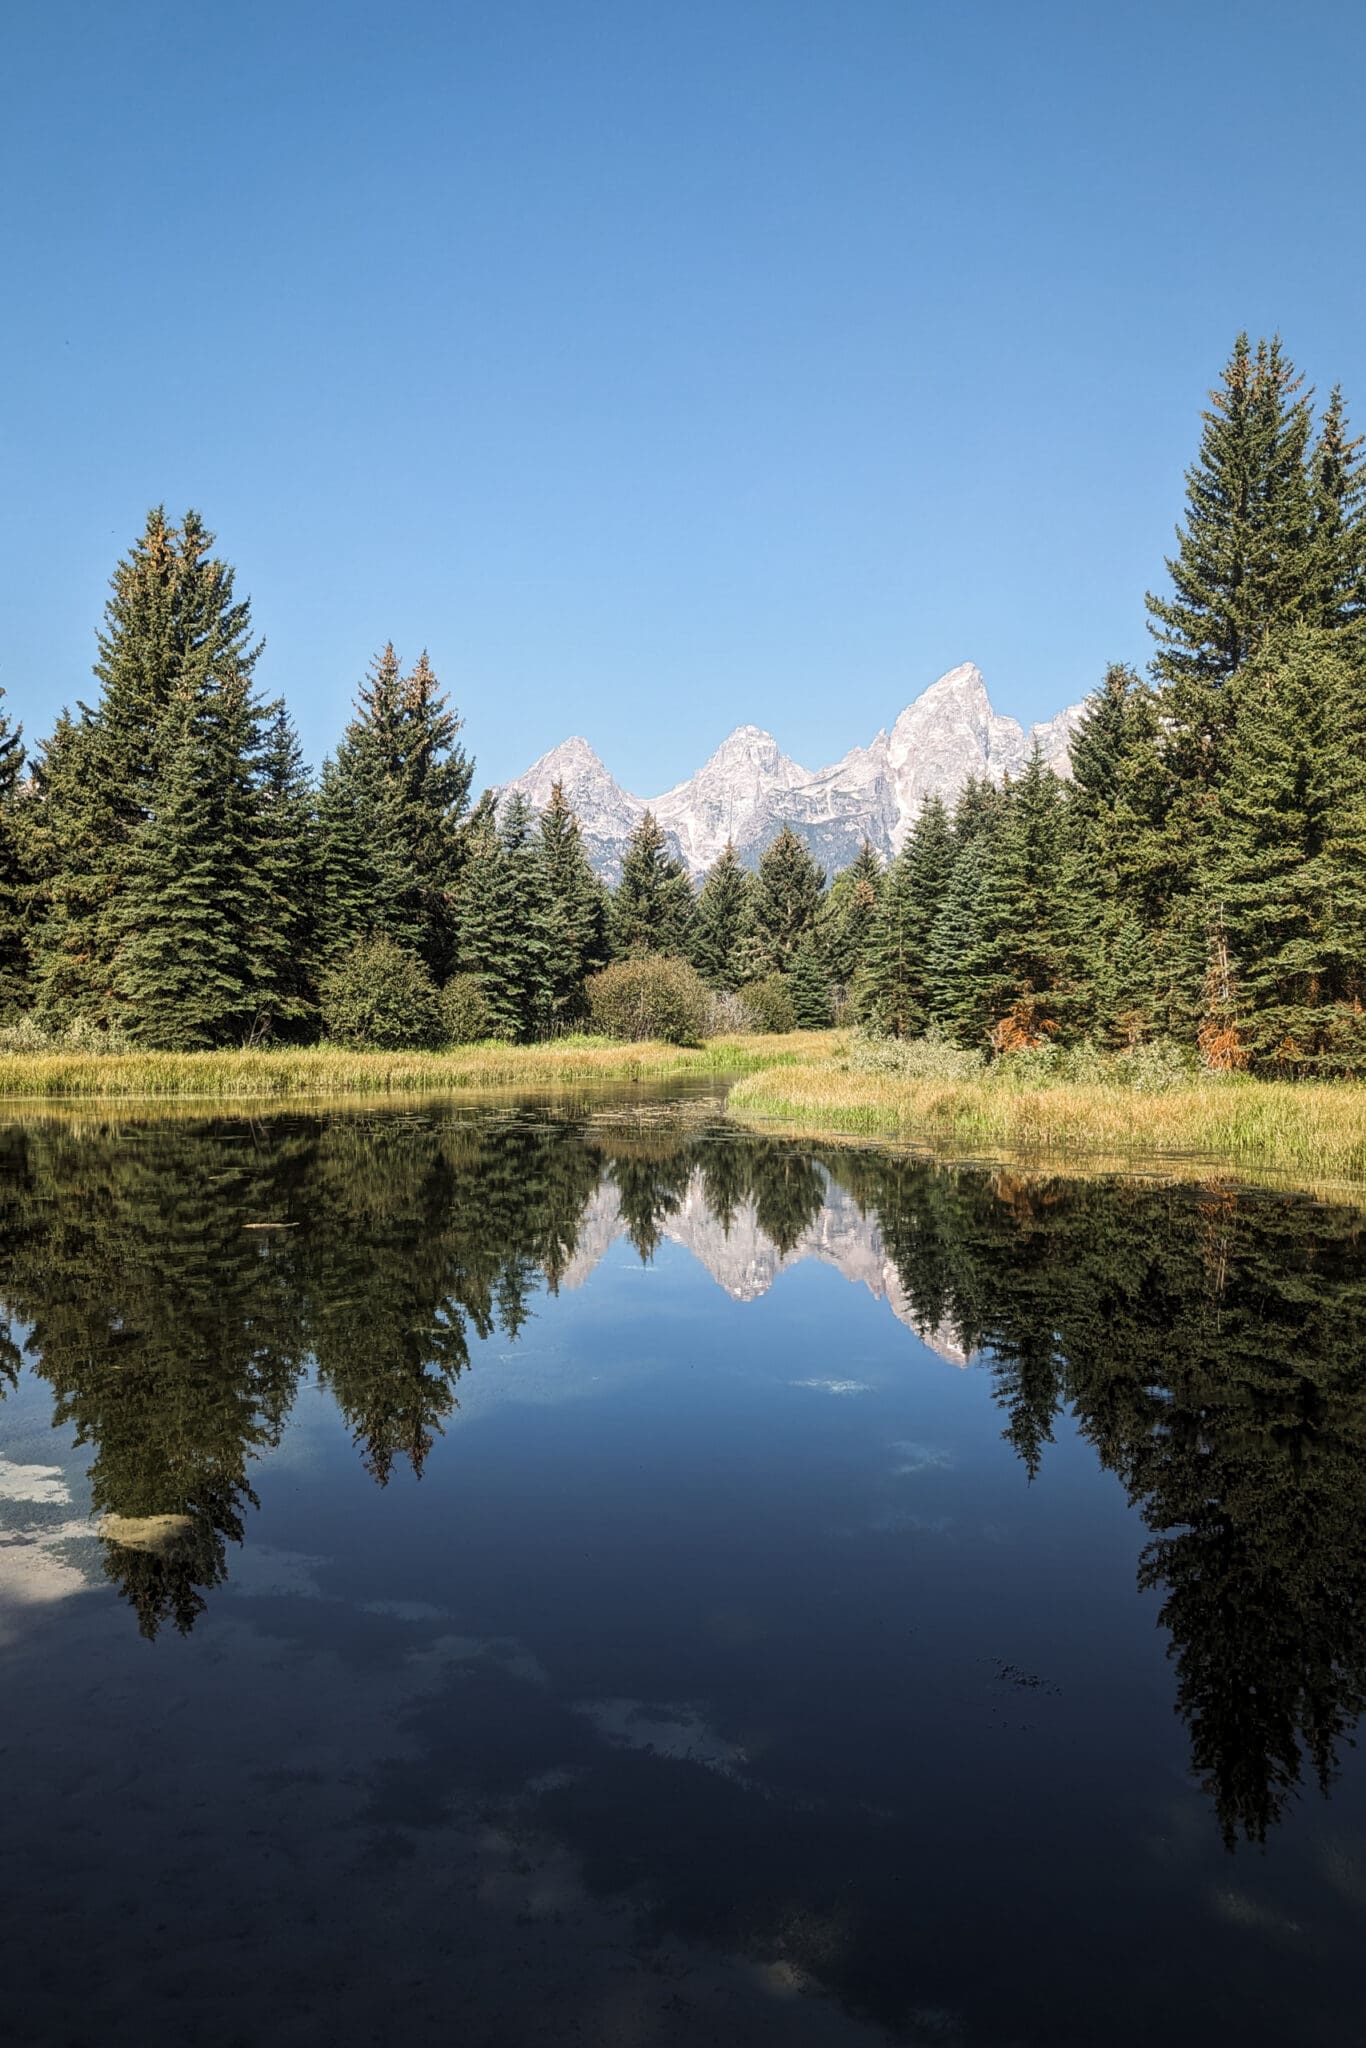 View of Grand Teton Mountains in front of water